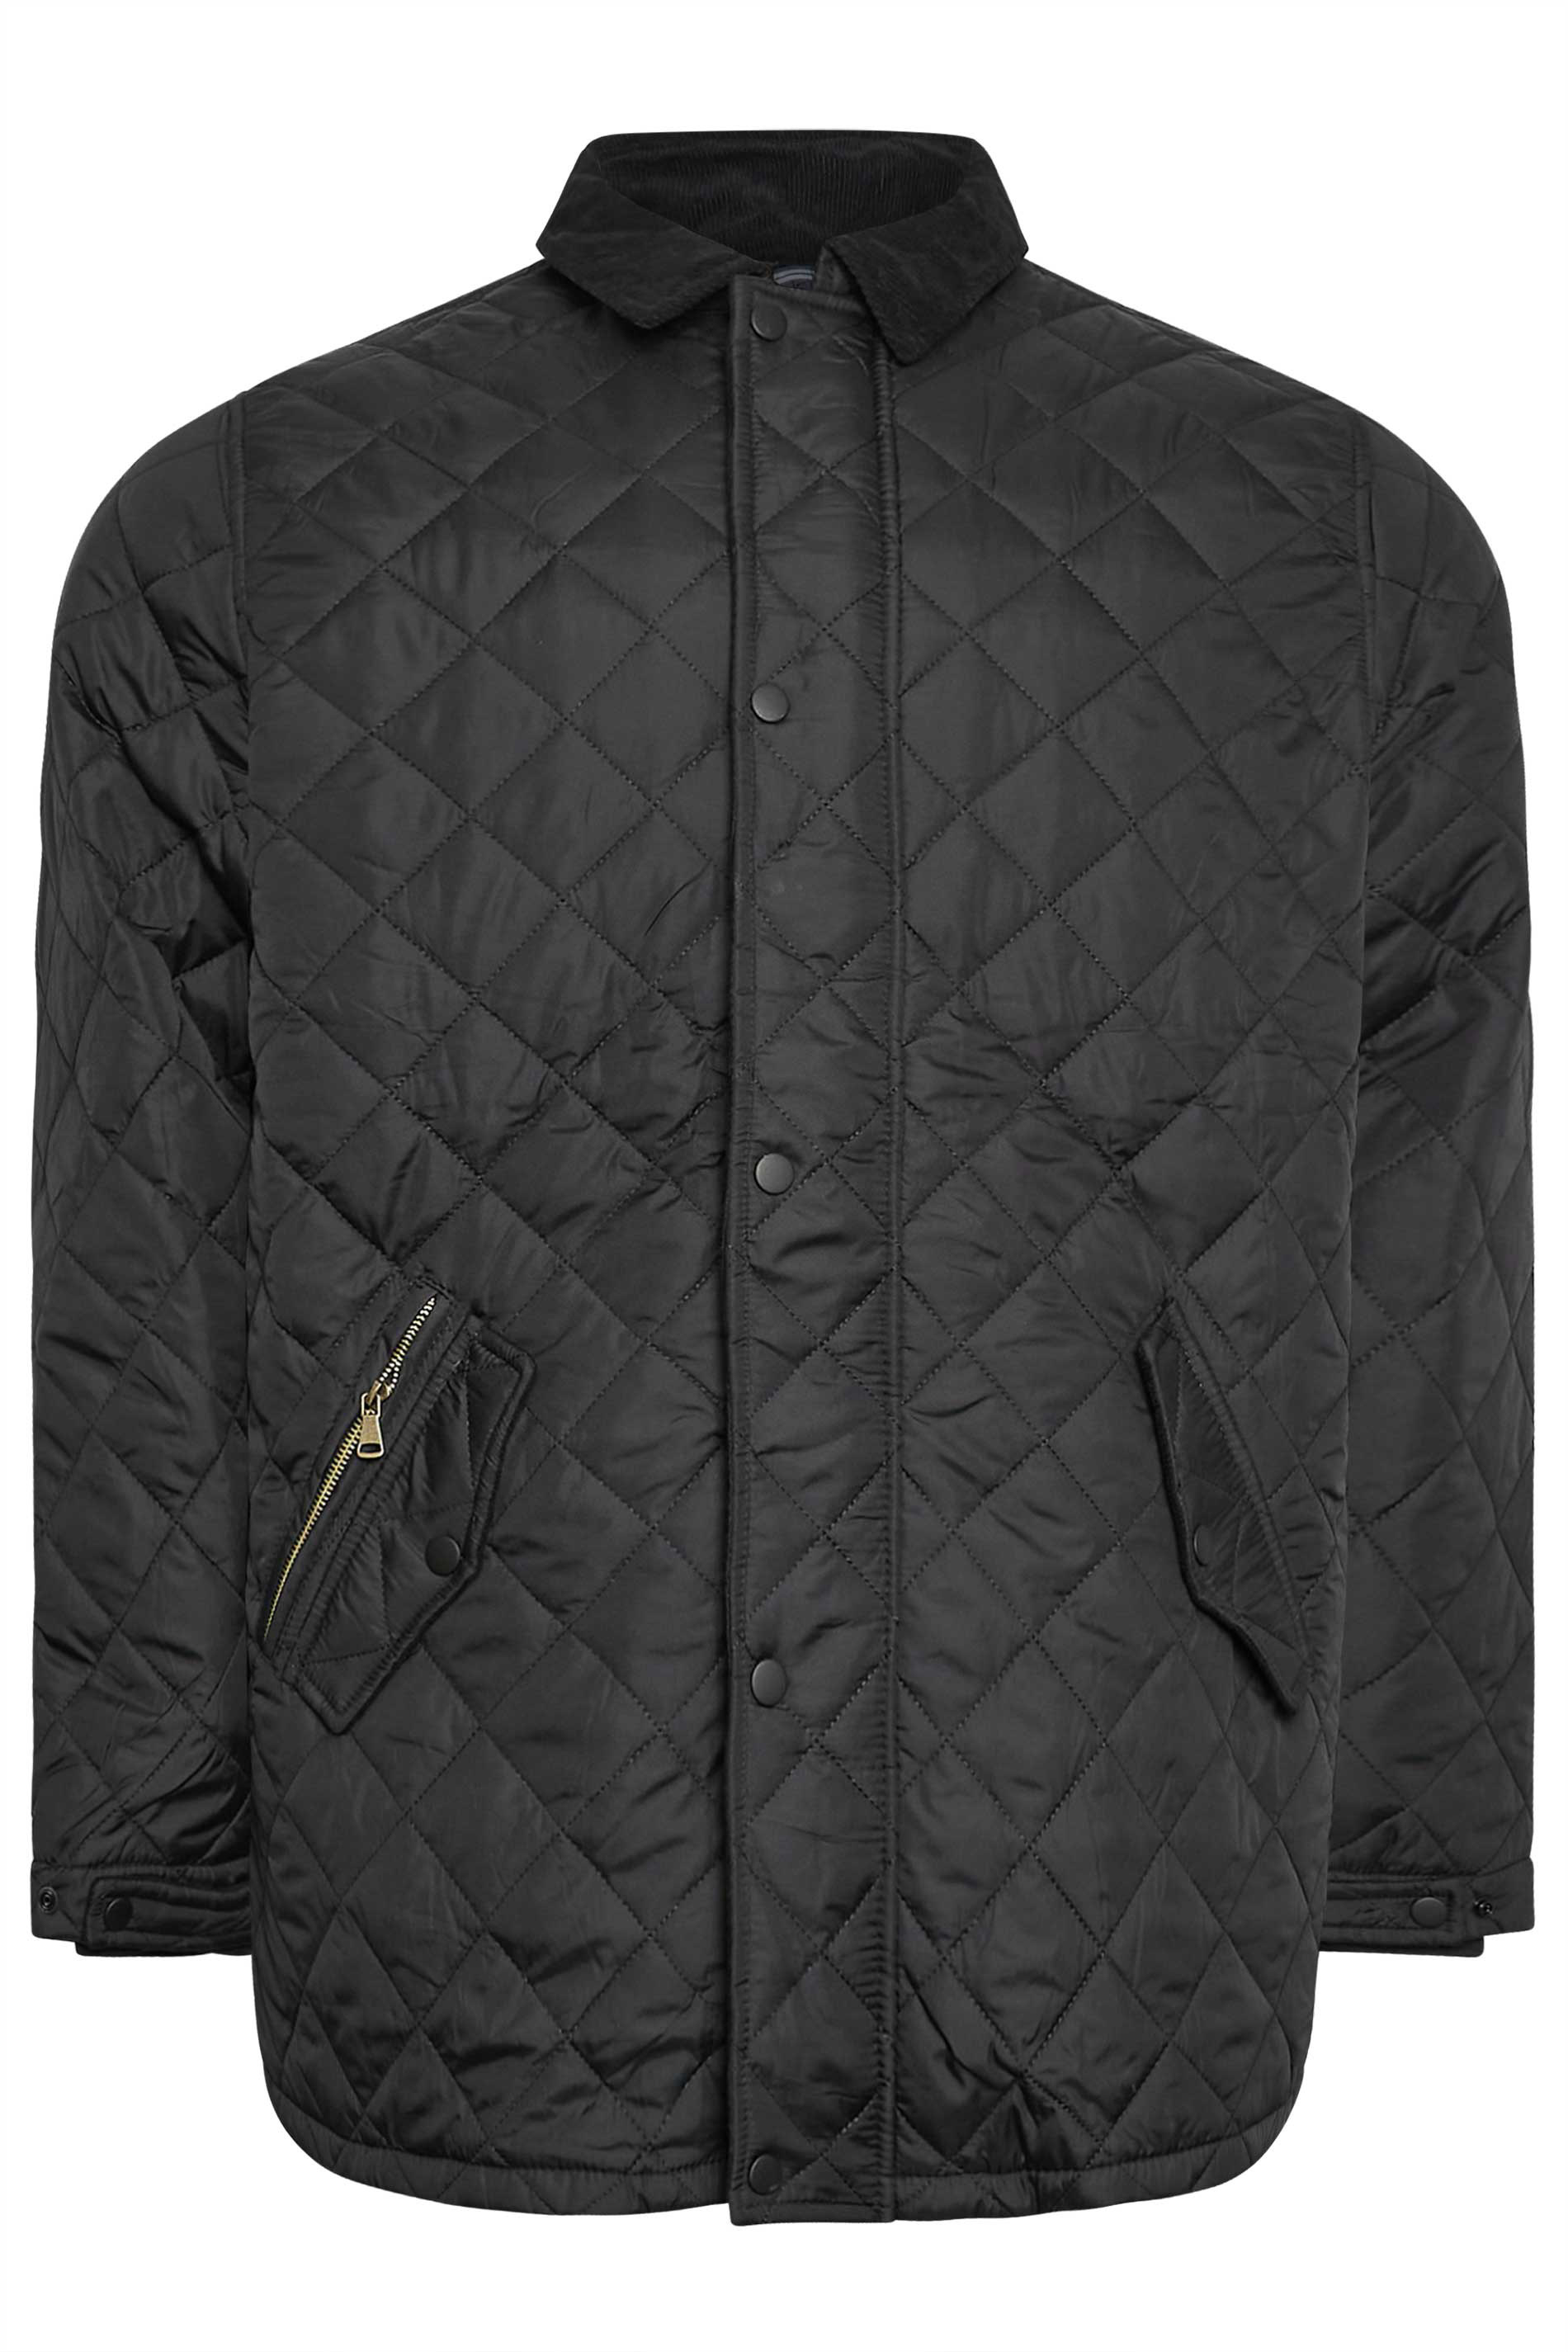 D555 Big & Tall Black Quilted Puffer Coat | BadRhino  2